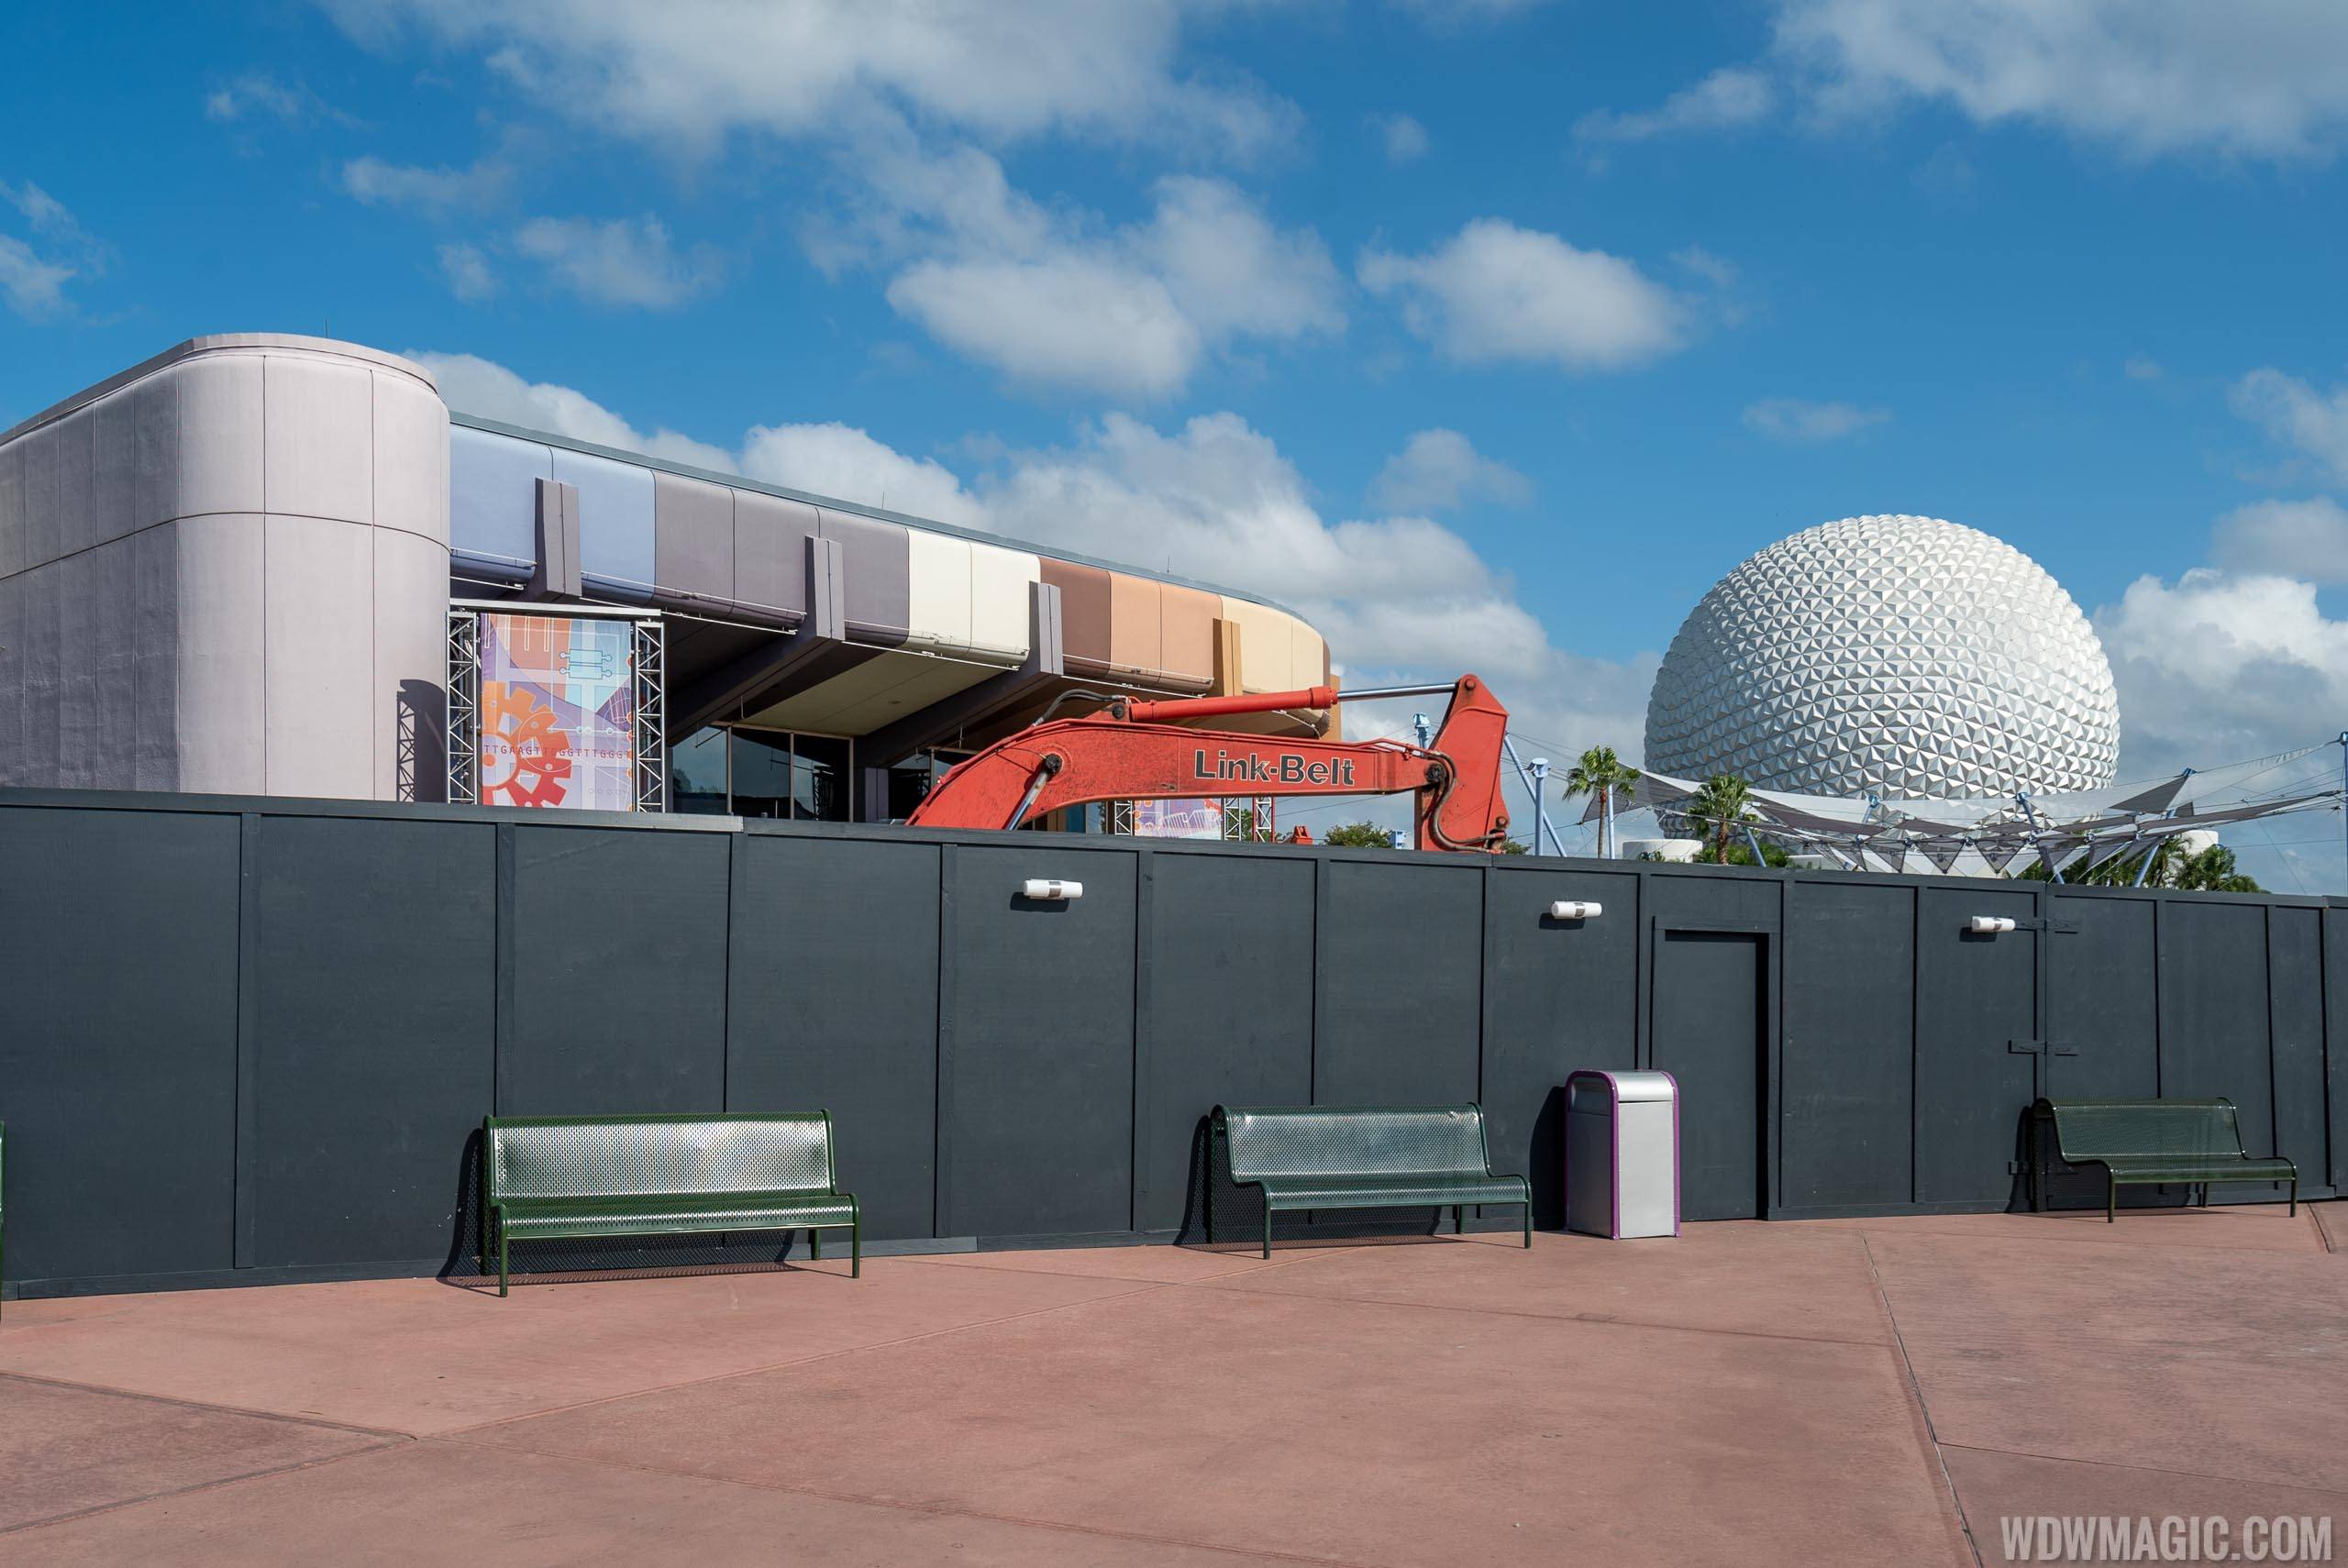 PHOTOS - Heavy machinery brought in to Innoventions West area ahead of demolition work